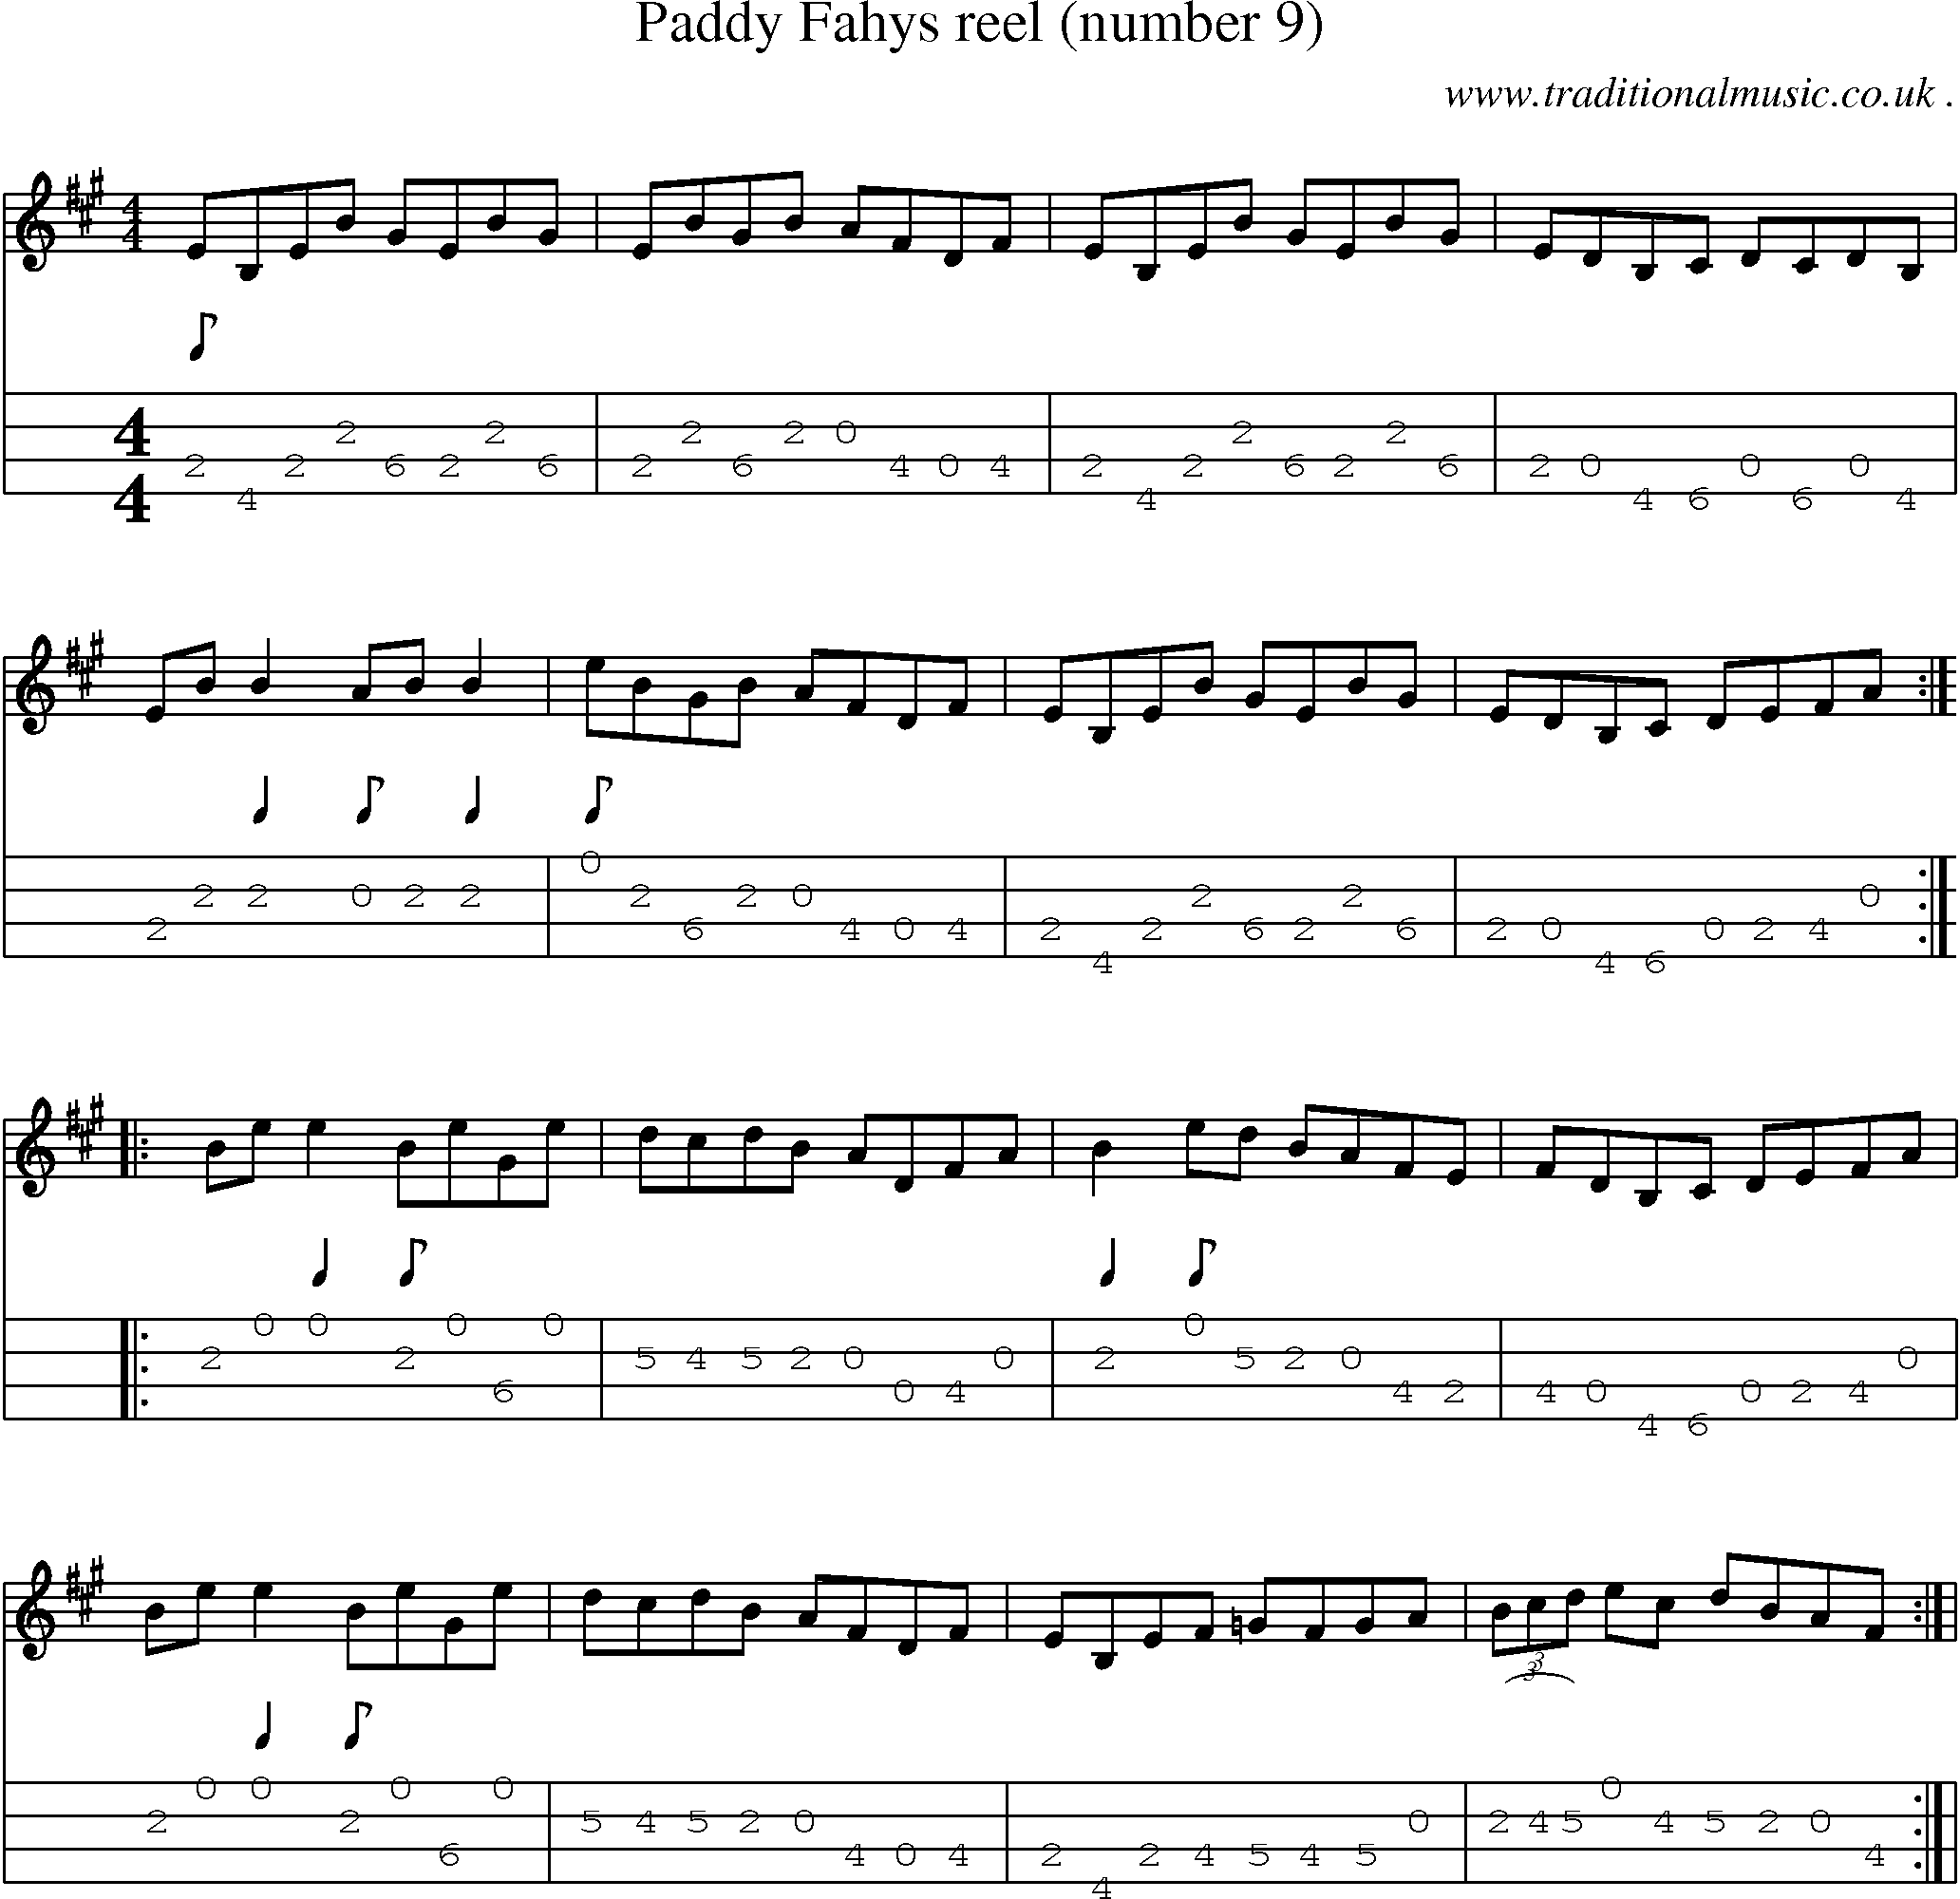 Sheet-Music and Mandolin Tabs for Paddy Fahys Reel (number 9)